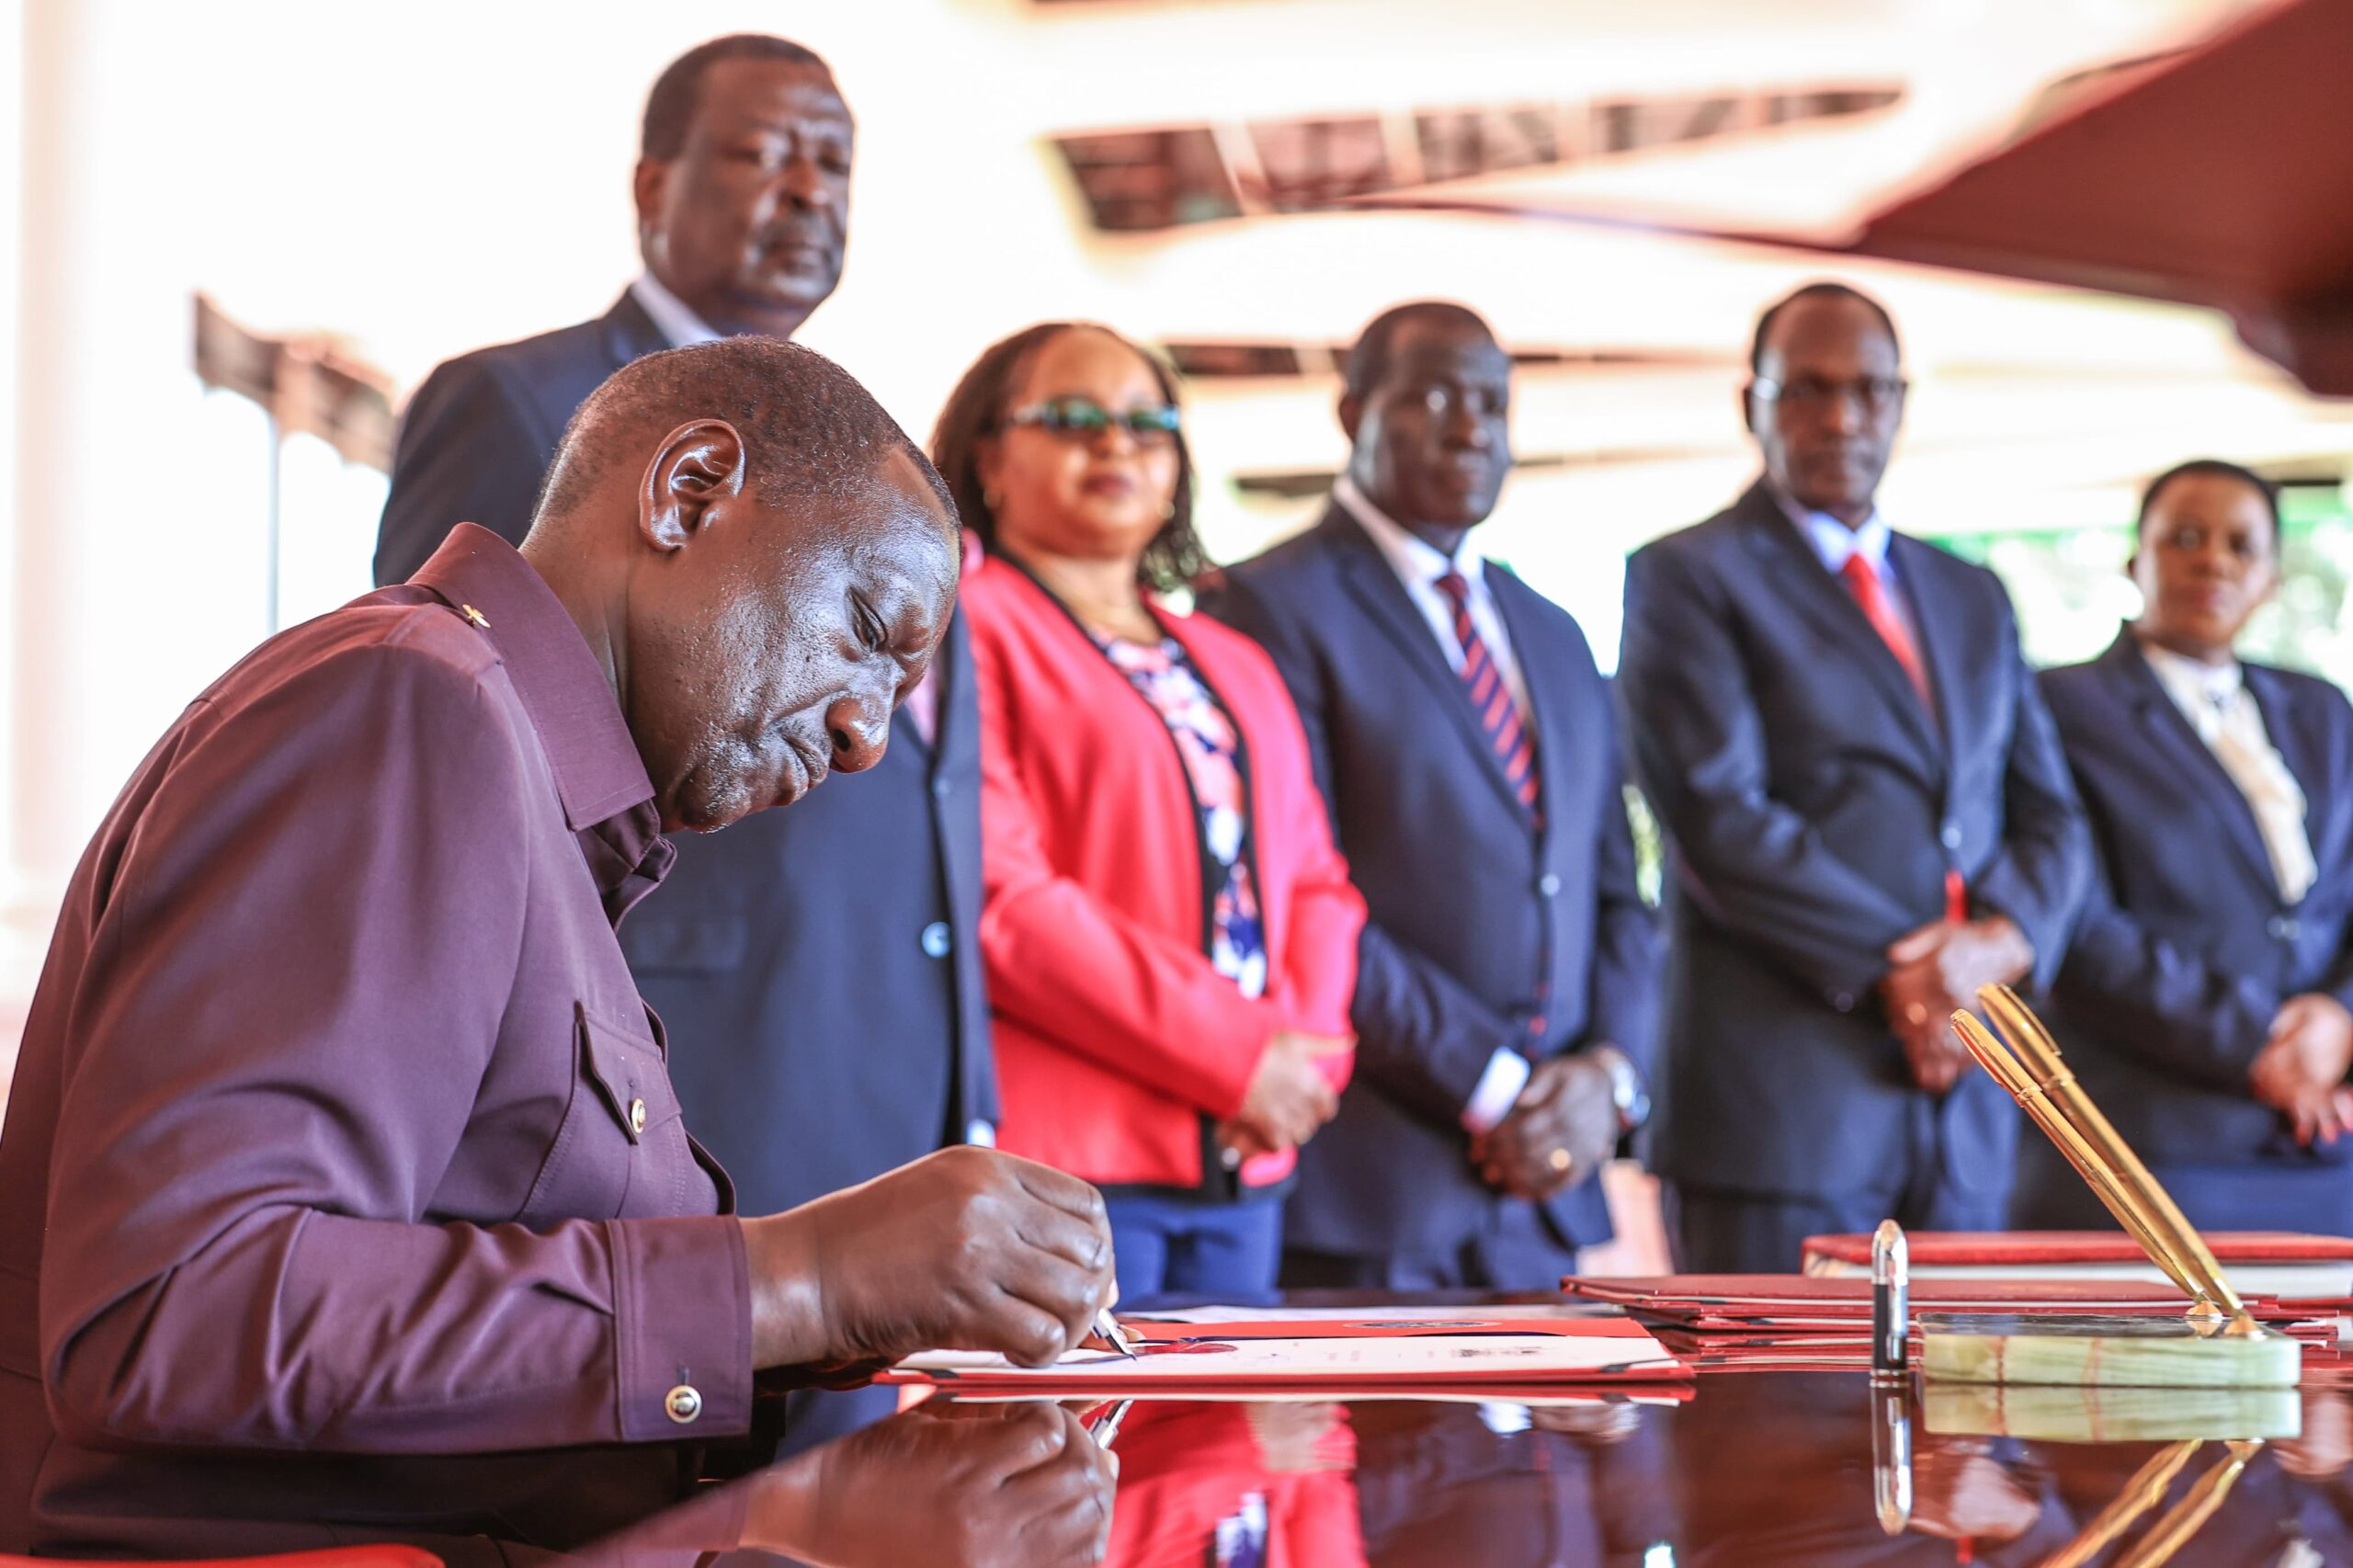 Ruto Appoints 10 Female Ambassador In Honor Of International Womens Day [Video]